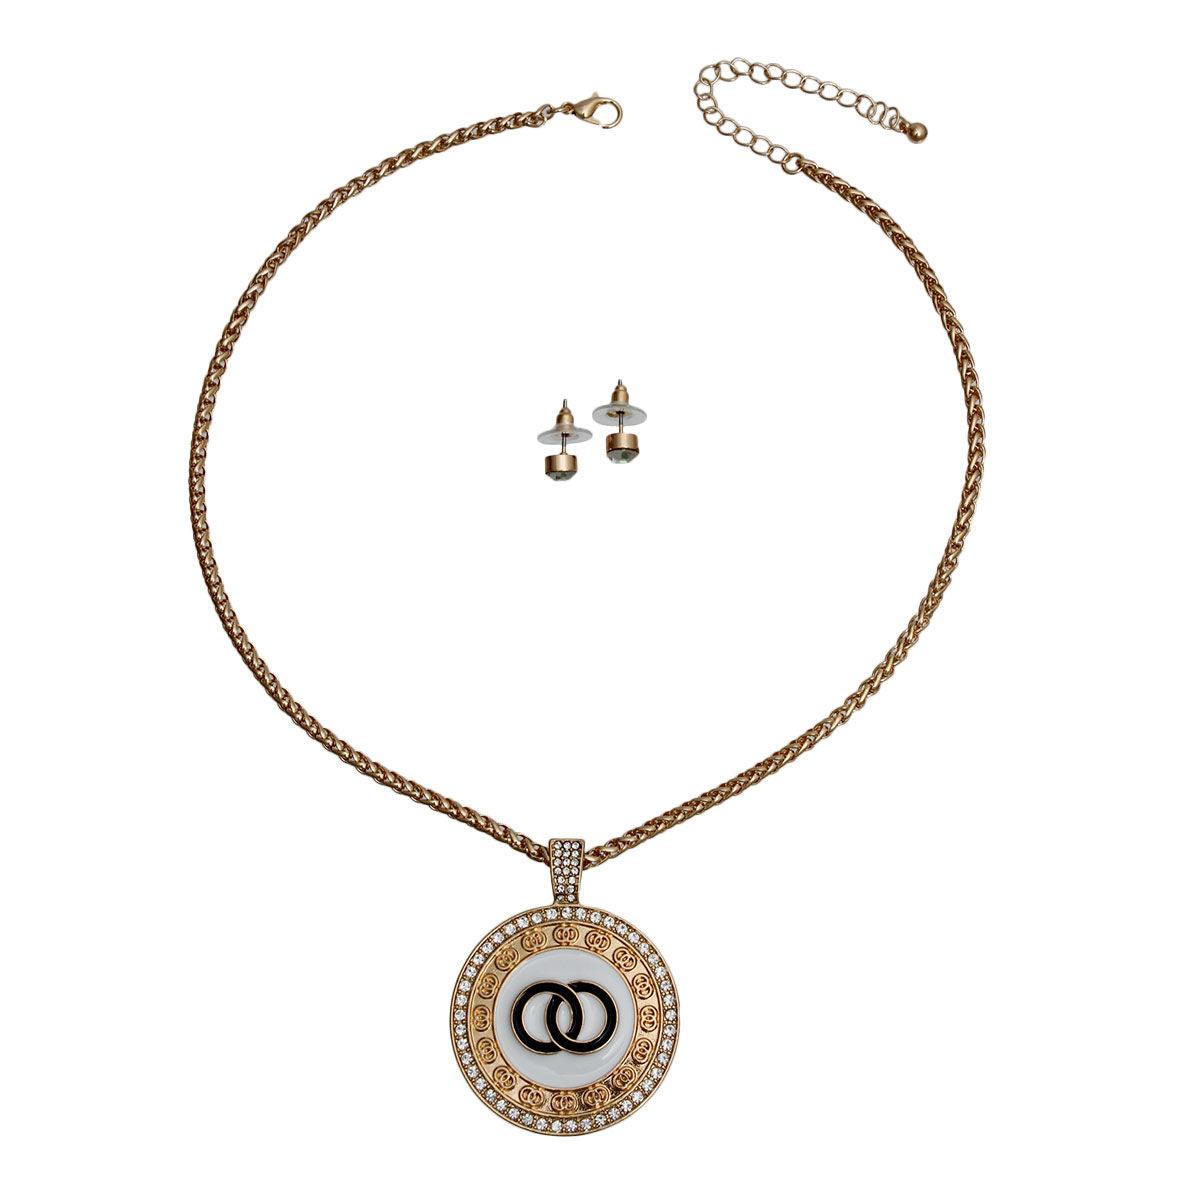 Women's Gold Elegant Infinity Necklaces Pendant Set: Express Timeless Connection